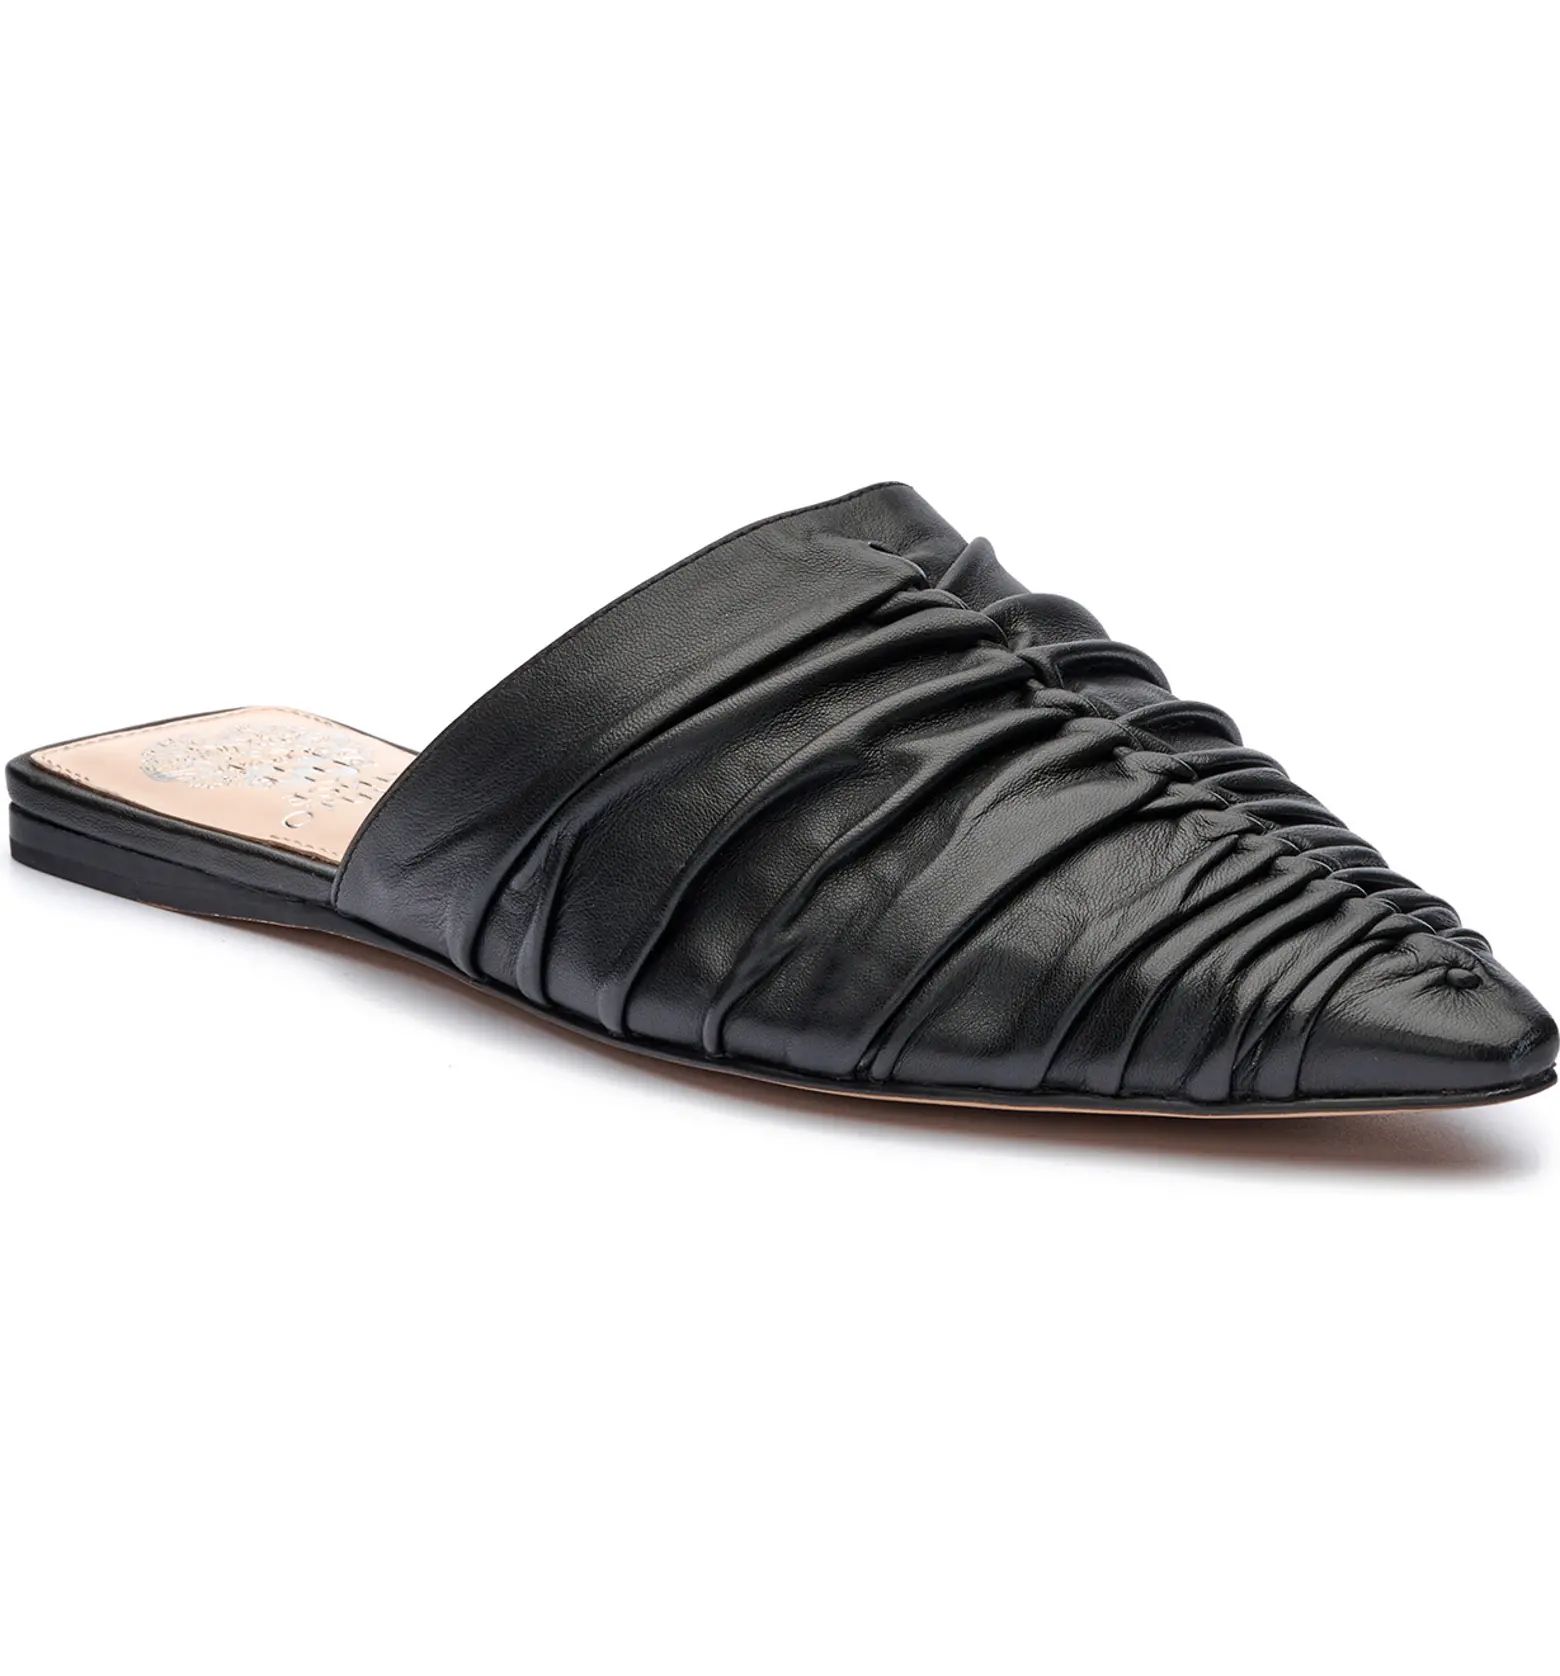 Riteren Ruched Pointed Toe Leather Mule | Nordstrom Rack